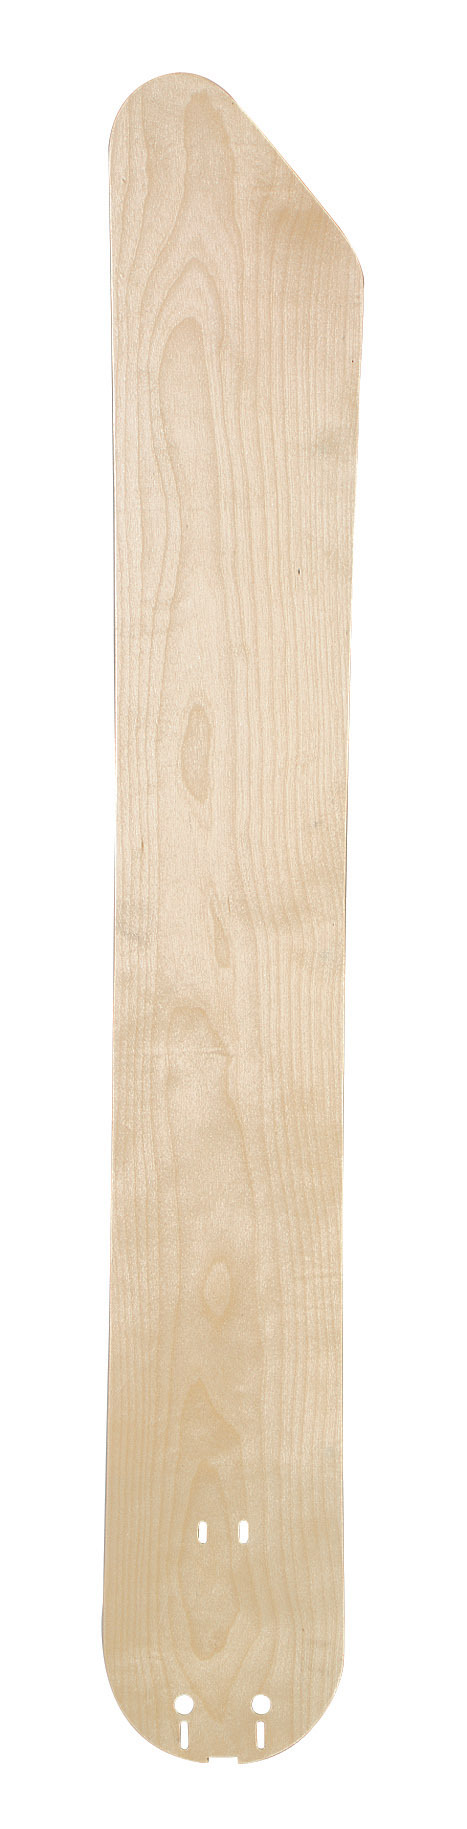 36" BLADE: CURVED, MAPLE - SET OF 5